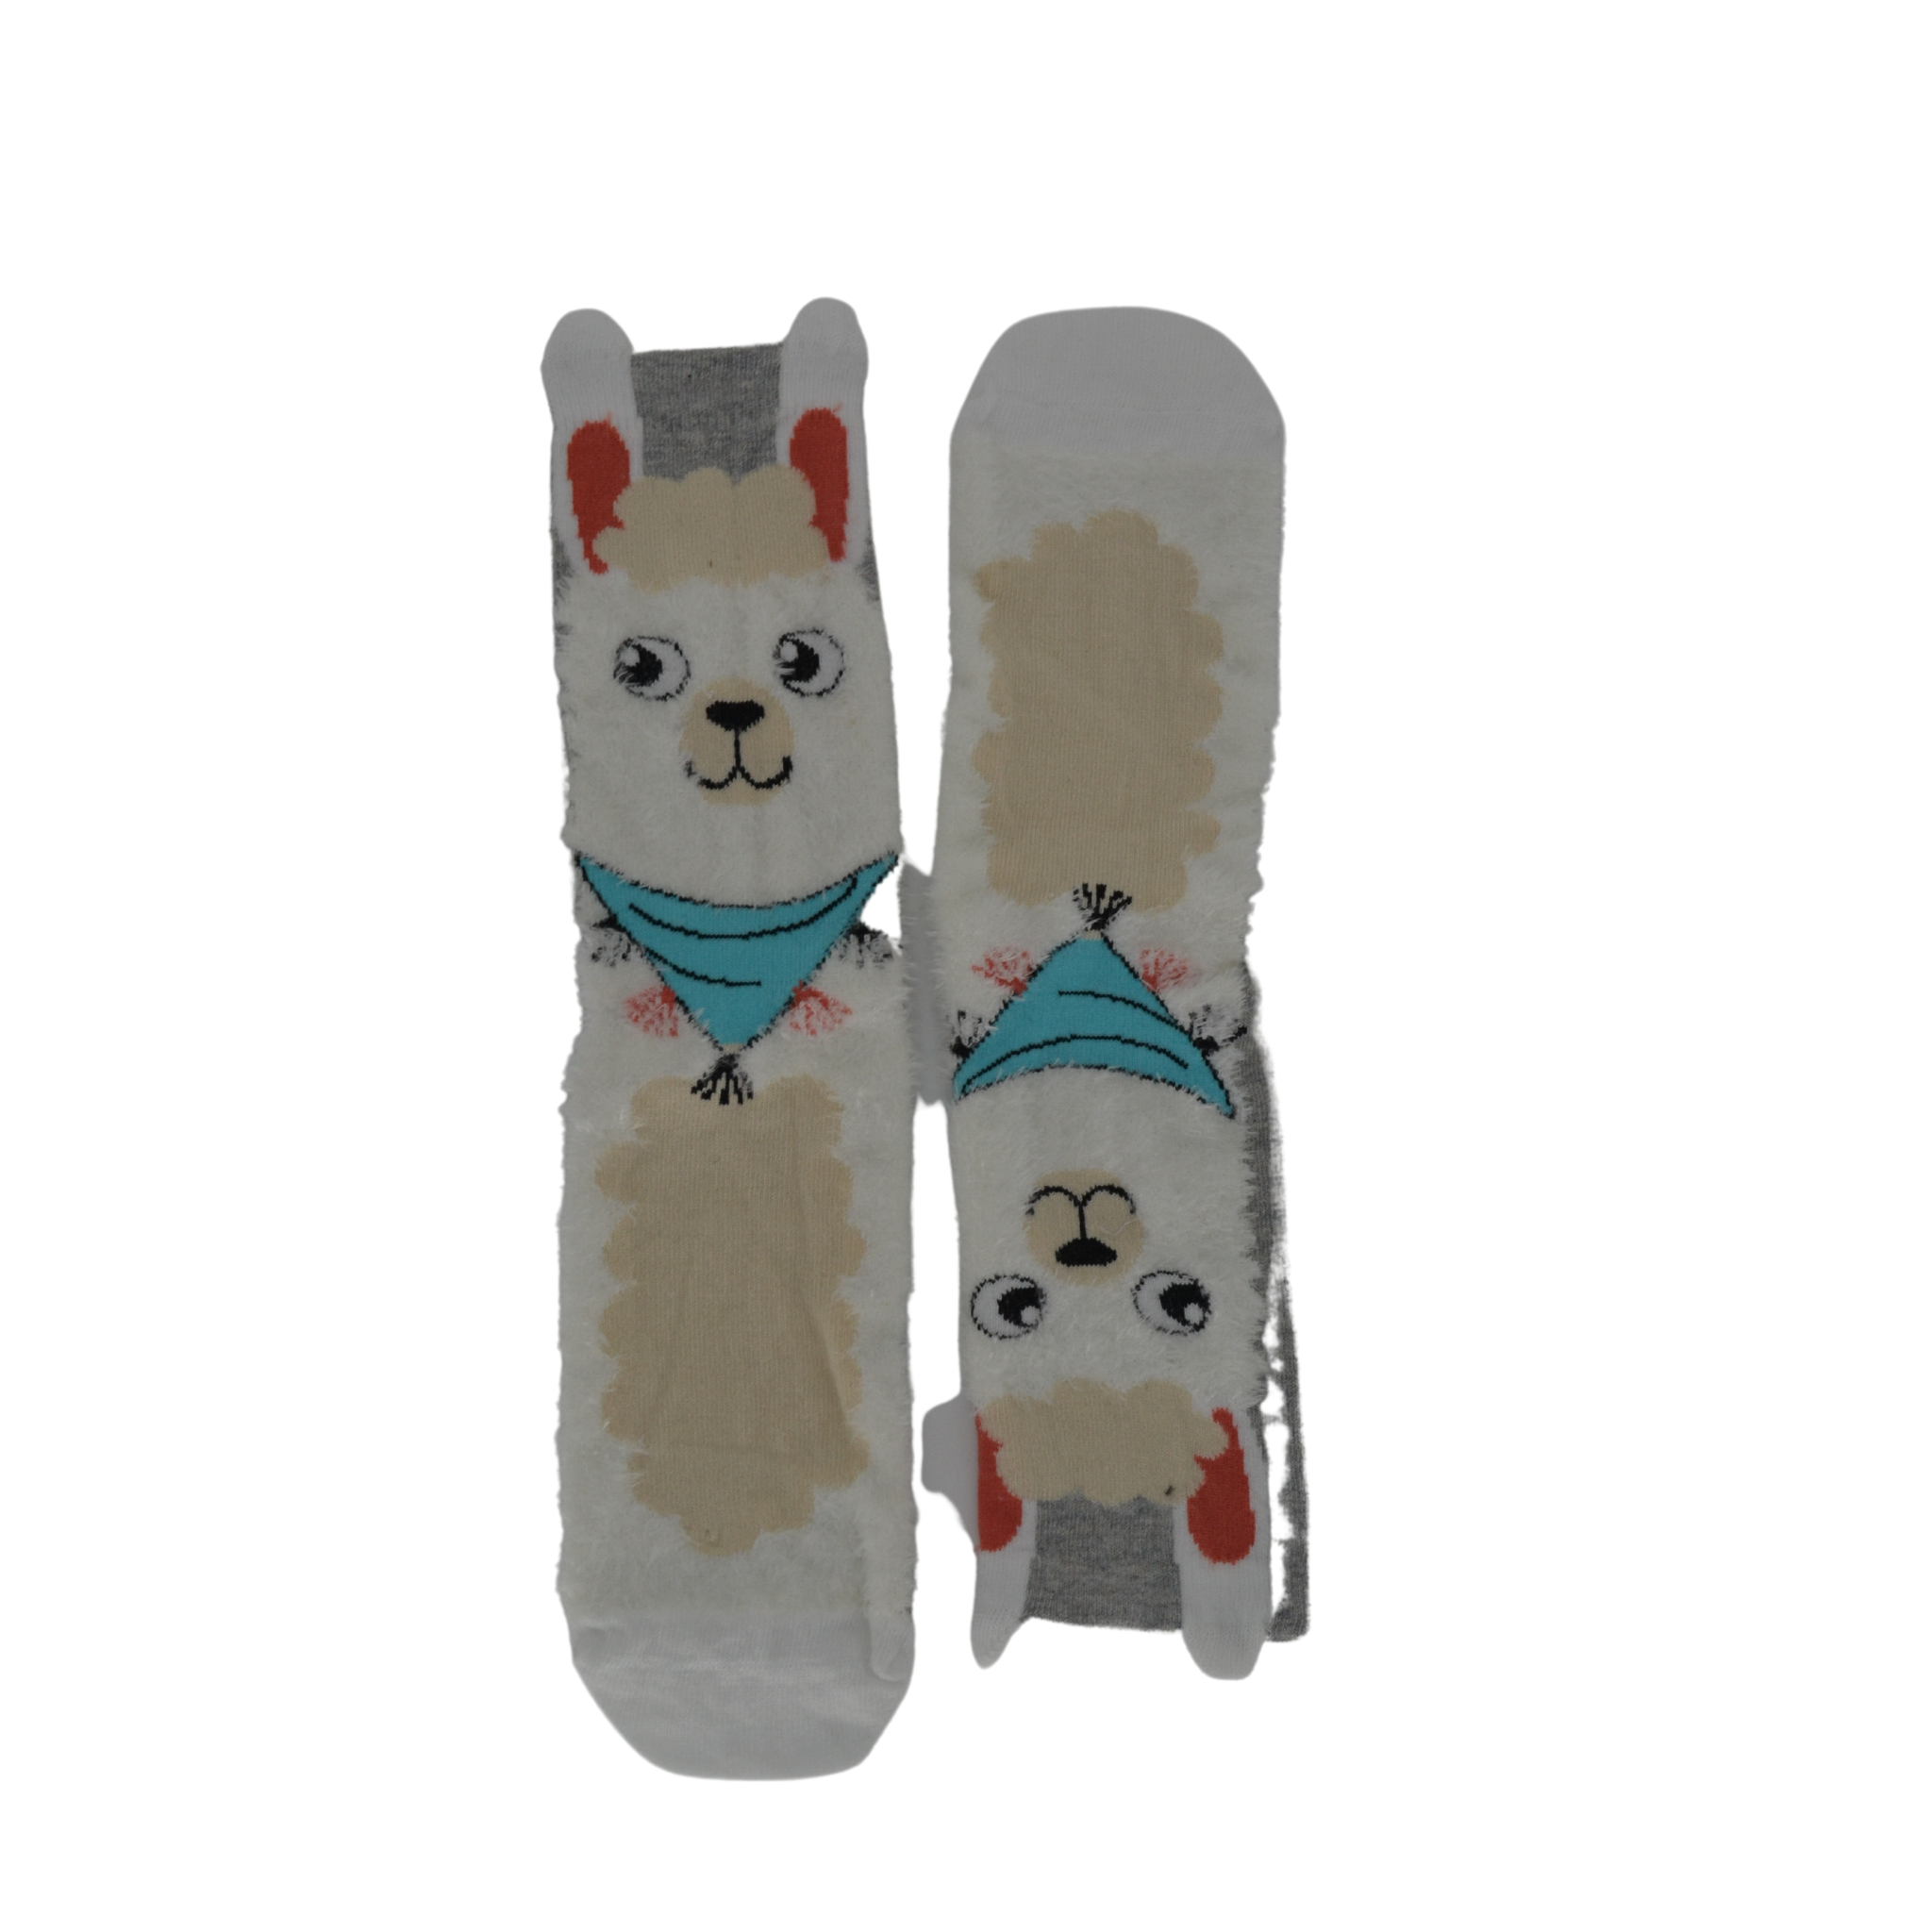 City of Clouds - Combed Cotton Novelty Print Socks - Kids & Adults